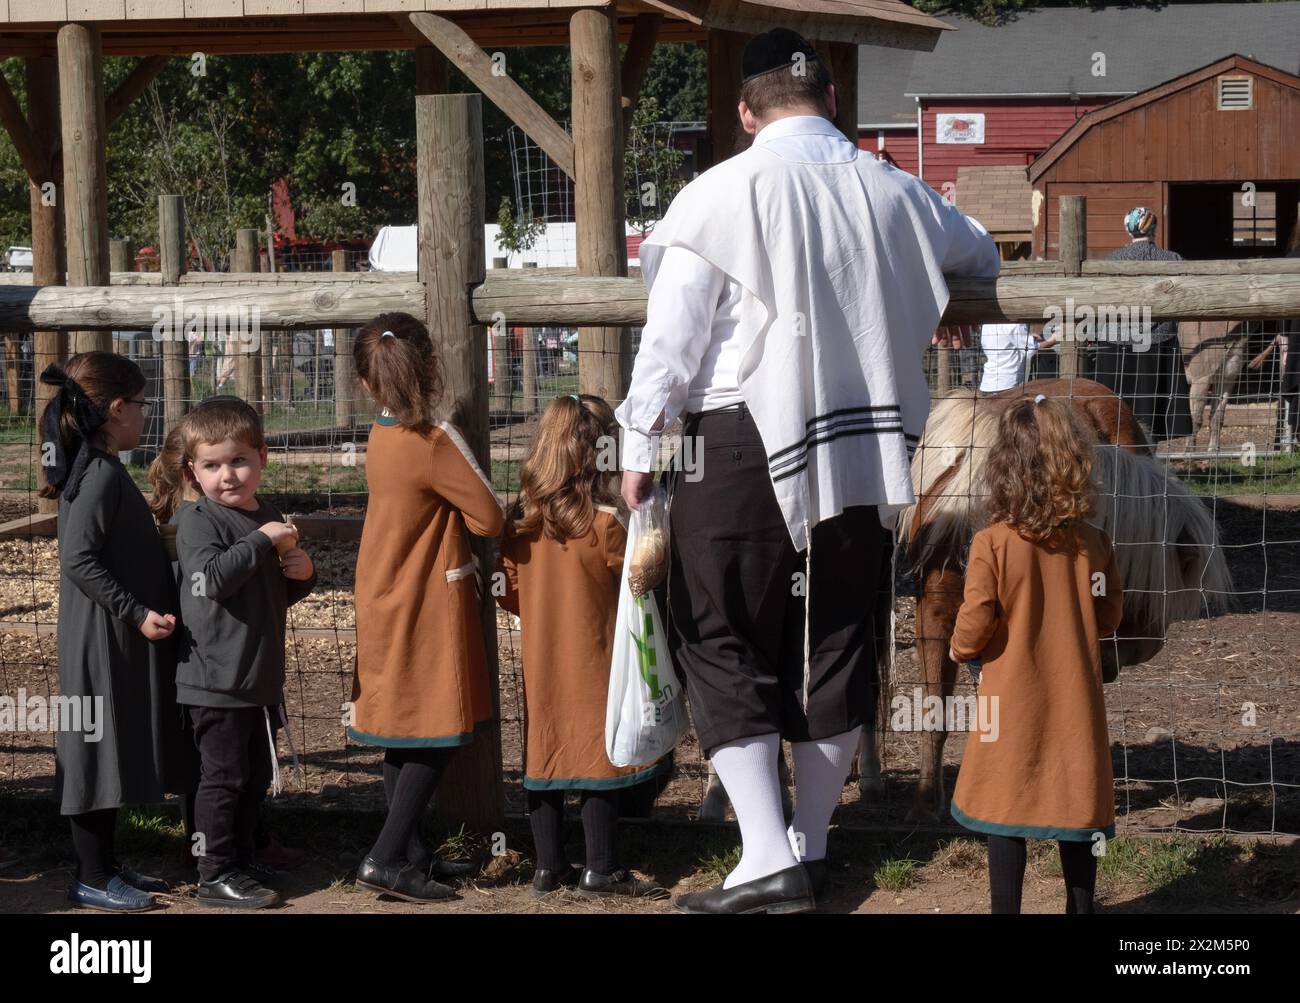 During Succos when it's mandated to have fun, a hasidic man and several children feed the animals at a Farm in Mosey, New York. Stock Photo